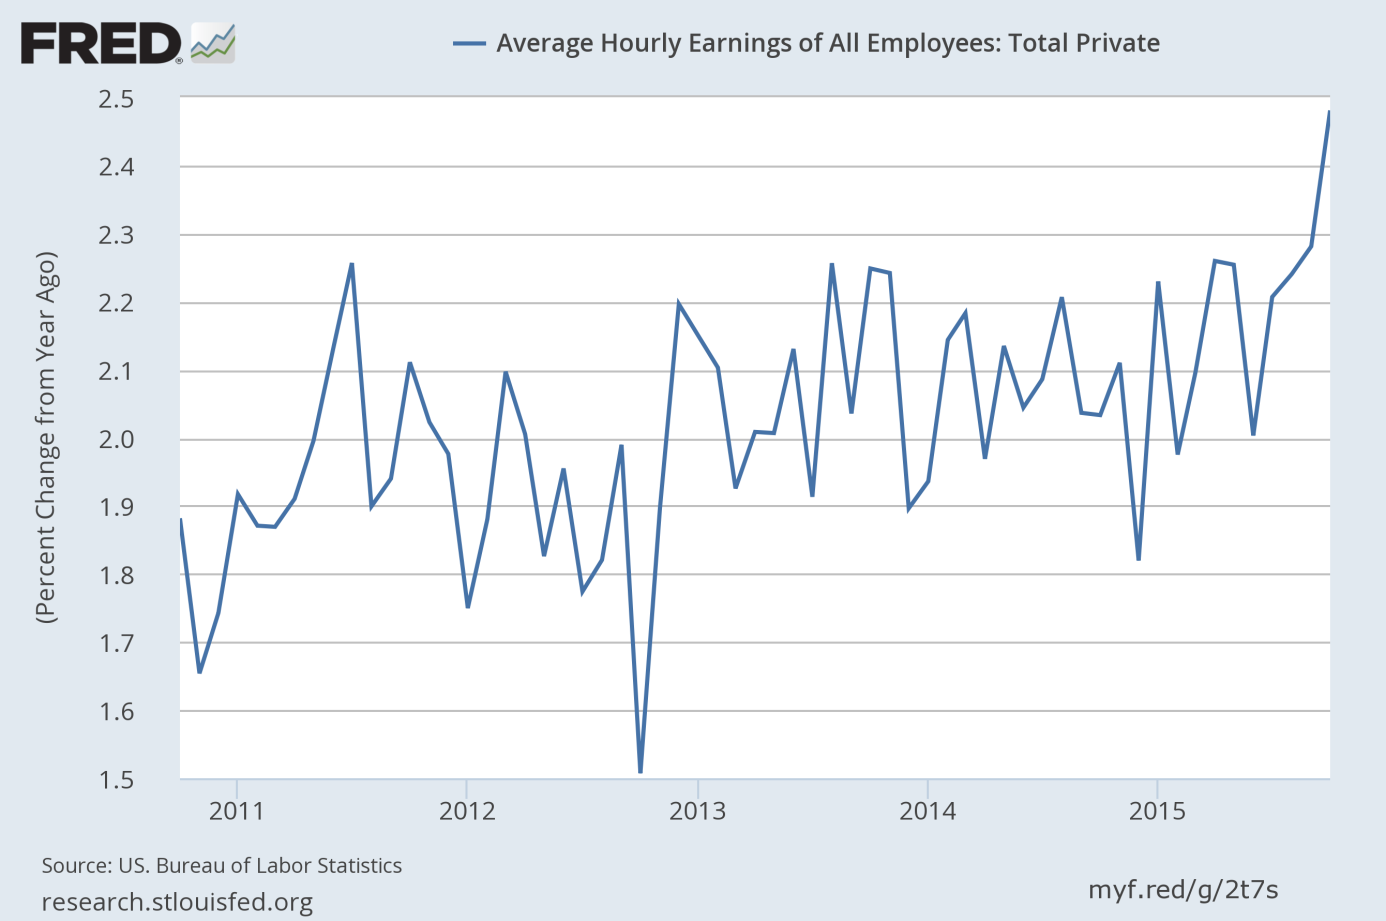 Average hourly earnings of private employees from 2010 to 2015